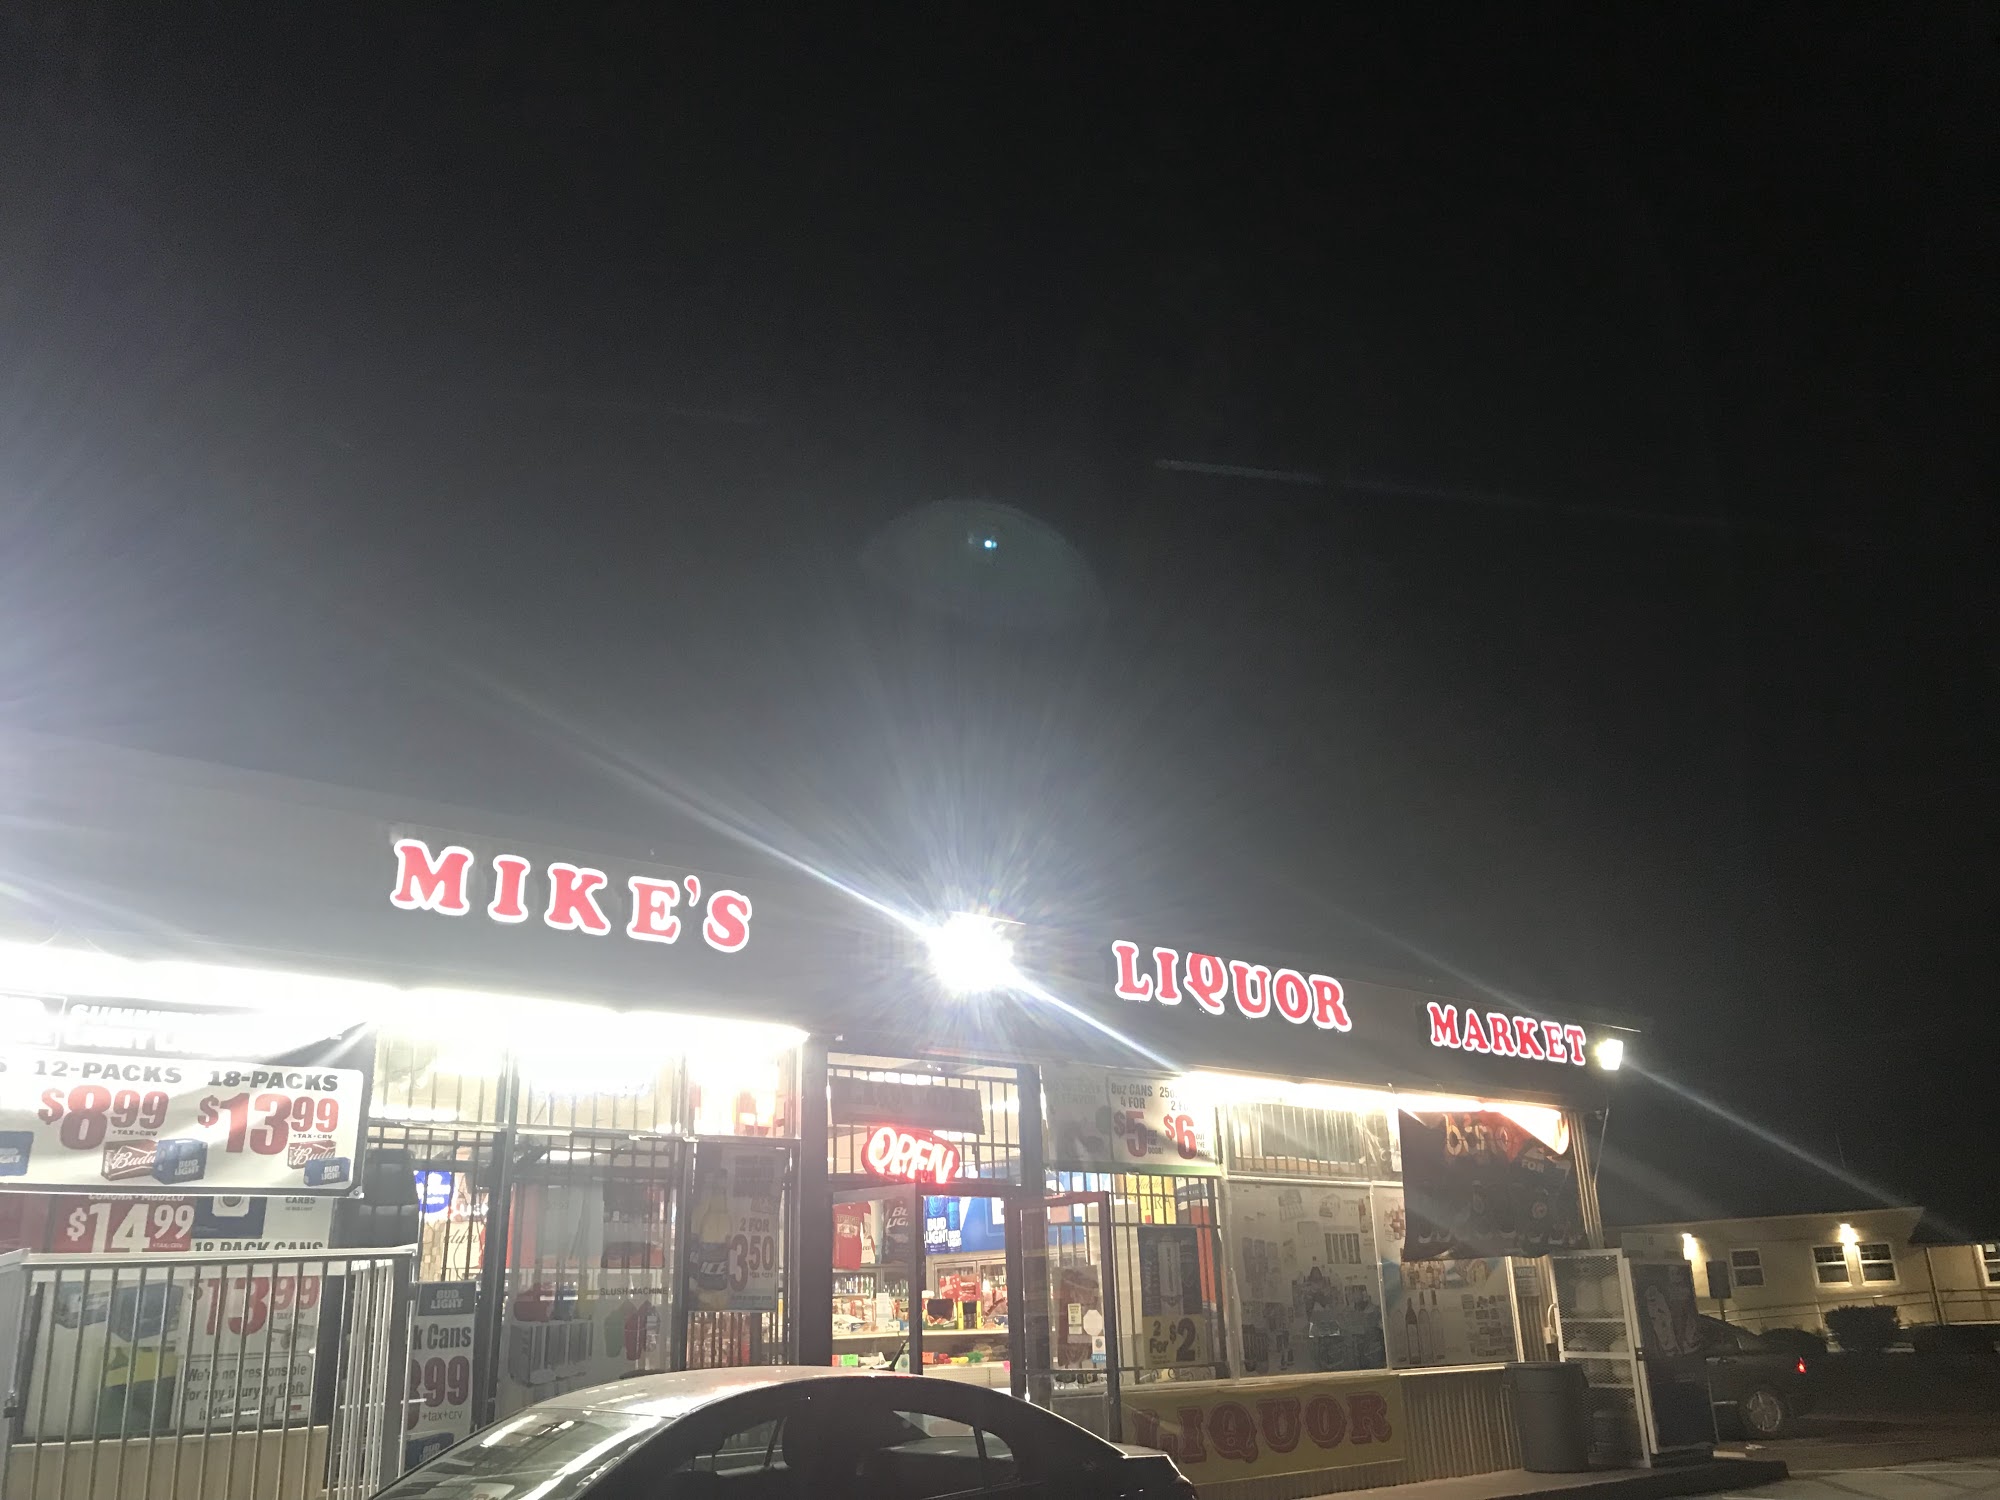 Mike's Liquor and Market